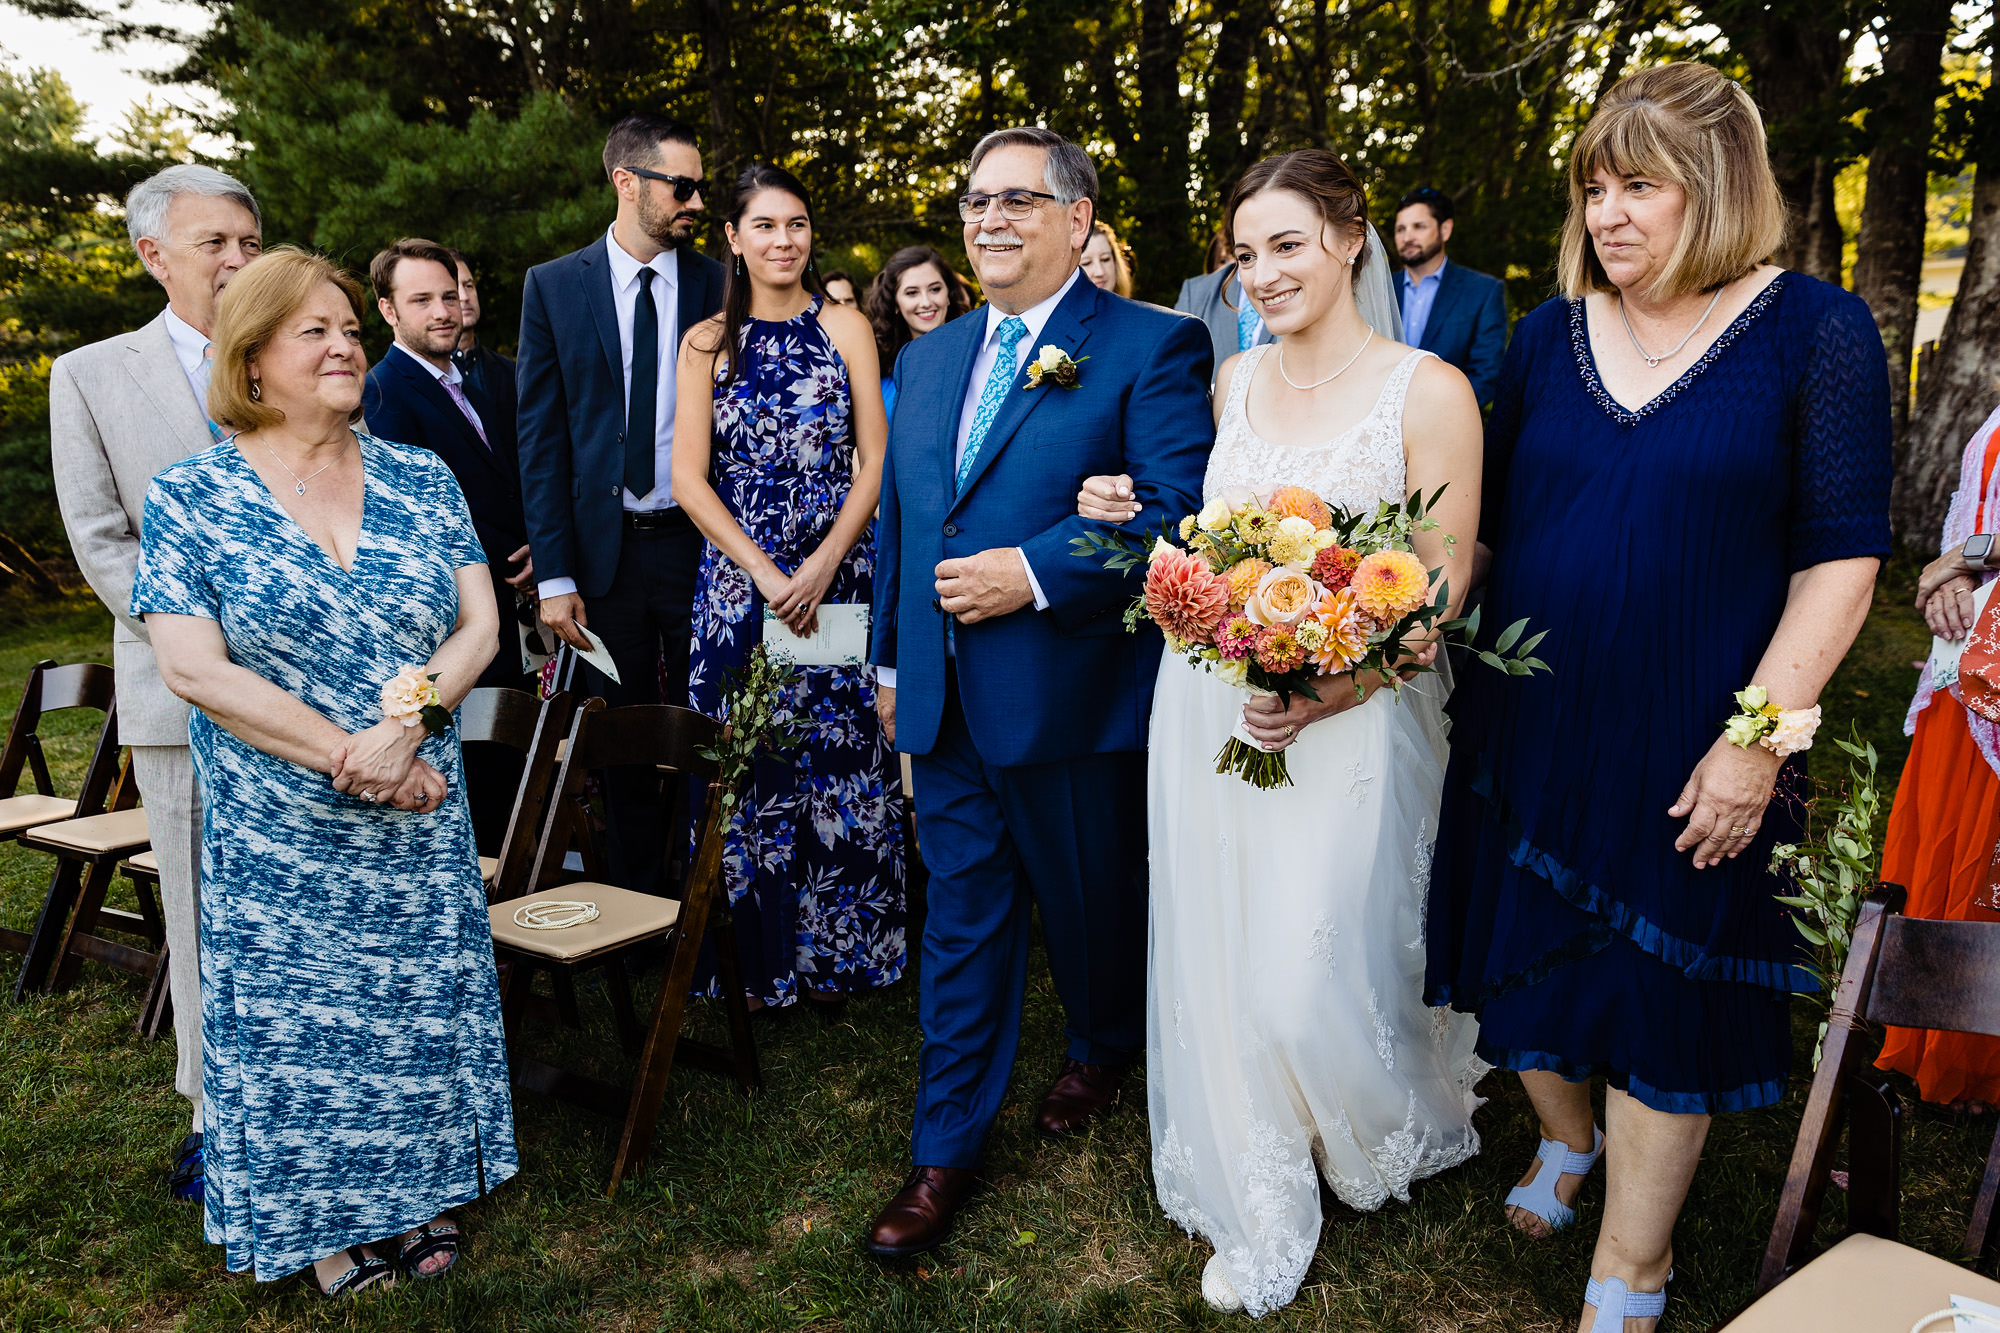 A wedding ceremony at Grey Havens Inn in Georgetown Maine